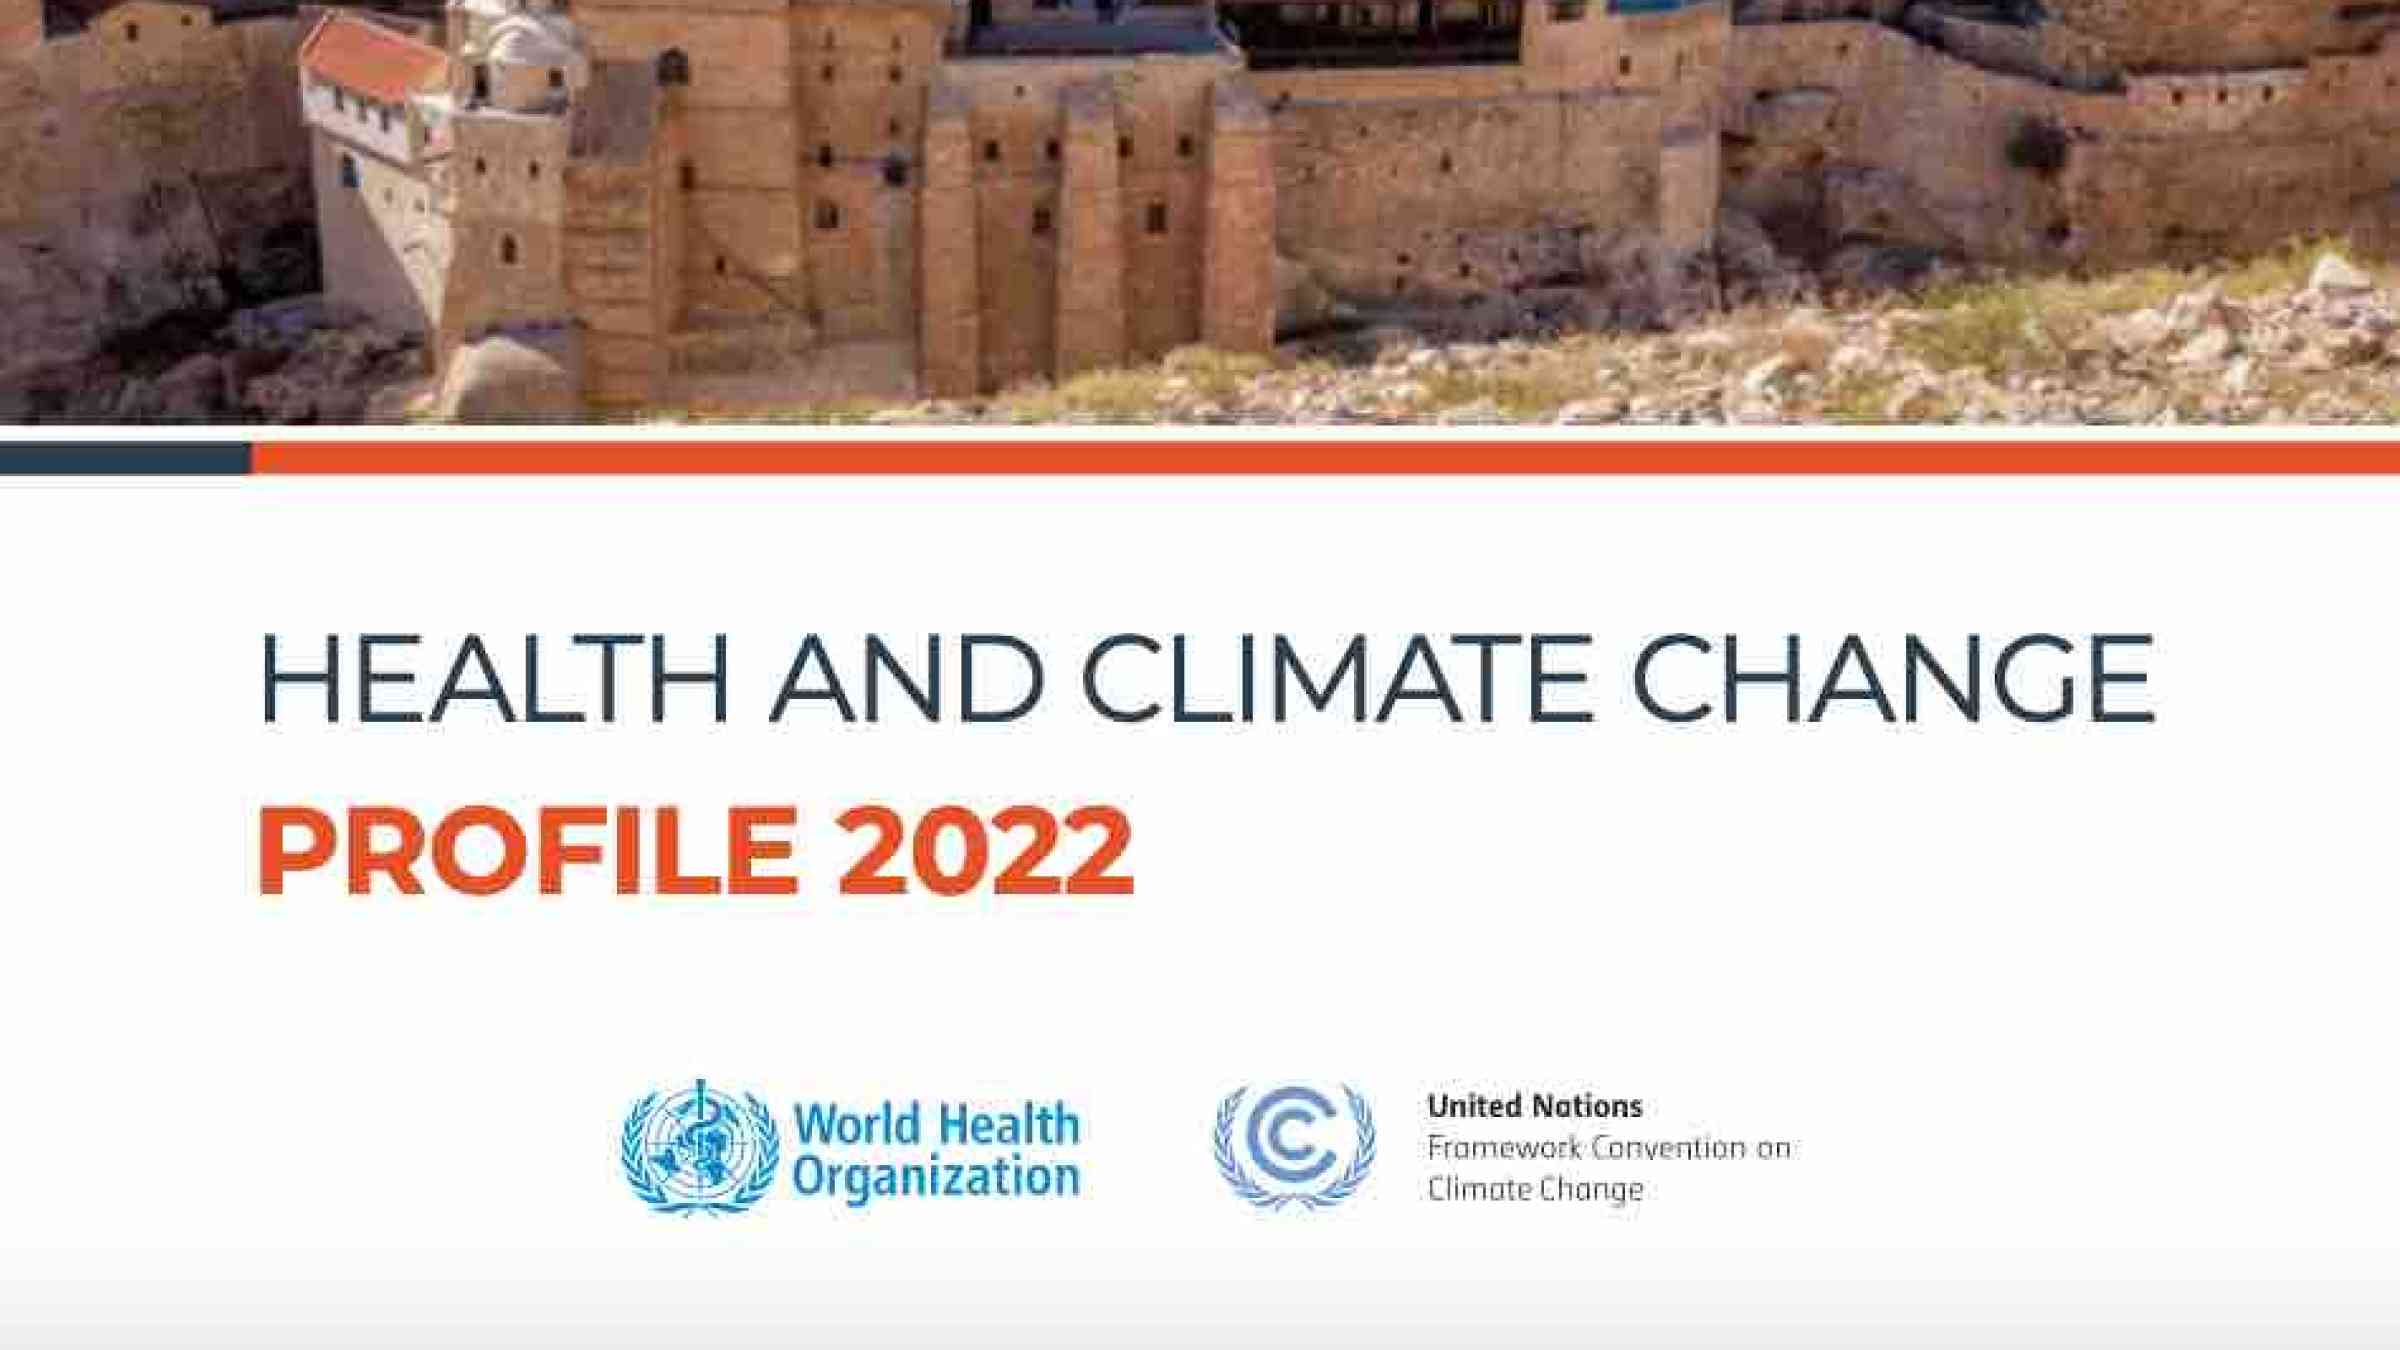 Cover of the health and climate change profile occupied Palestinian territory: aerial image of a town on a hill slope